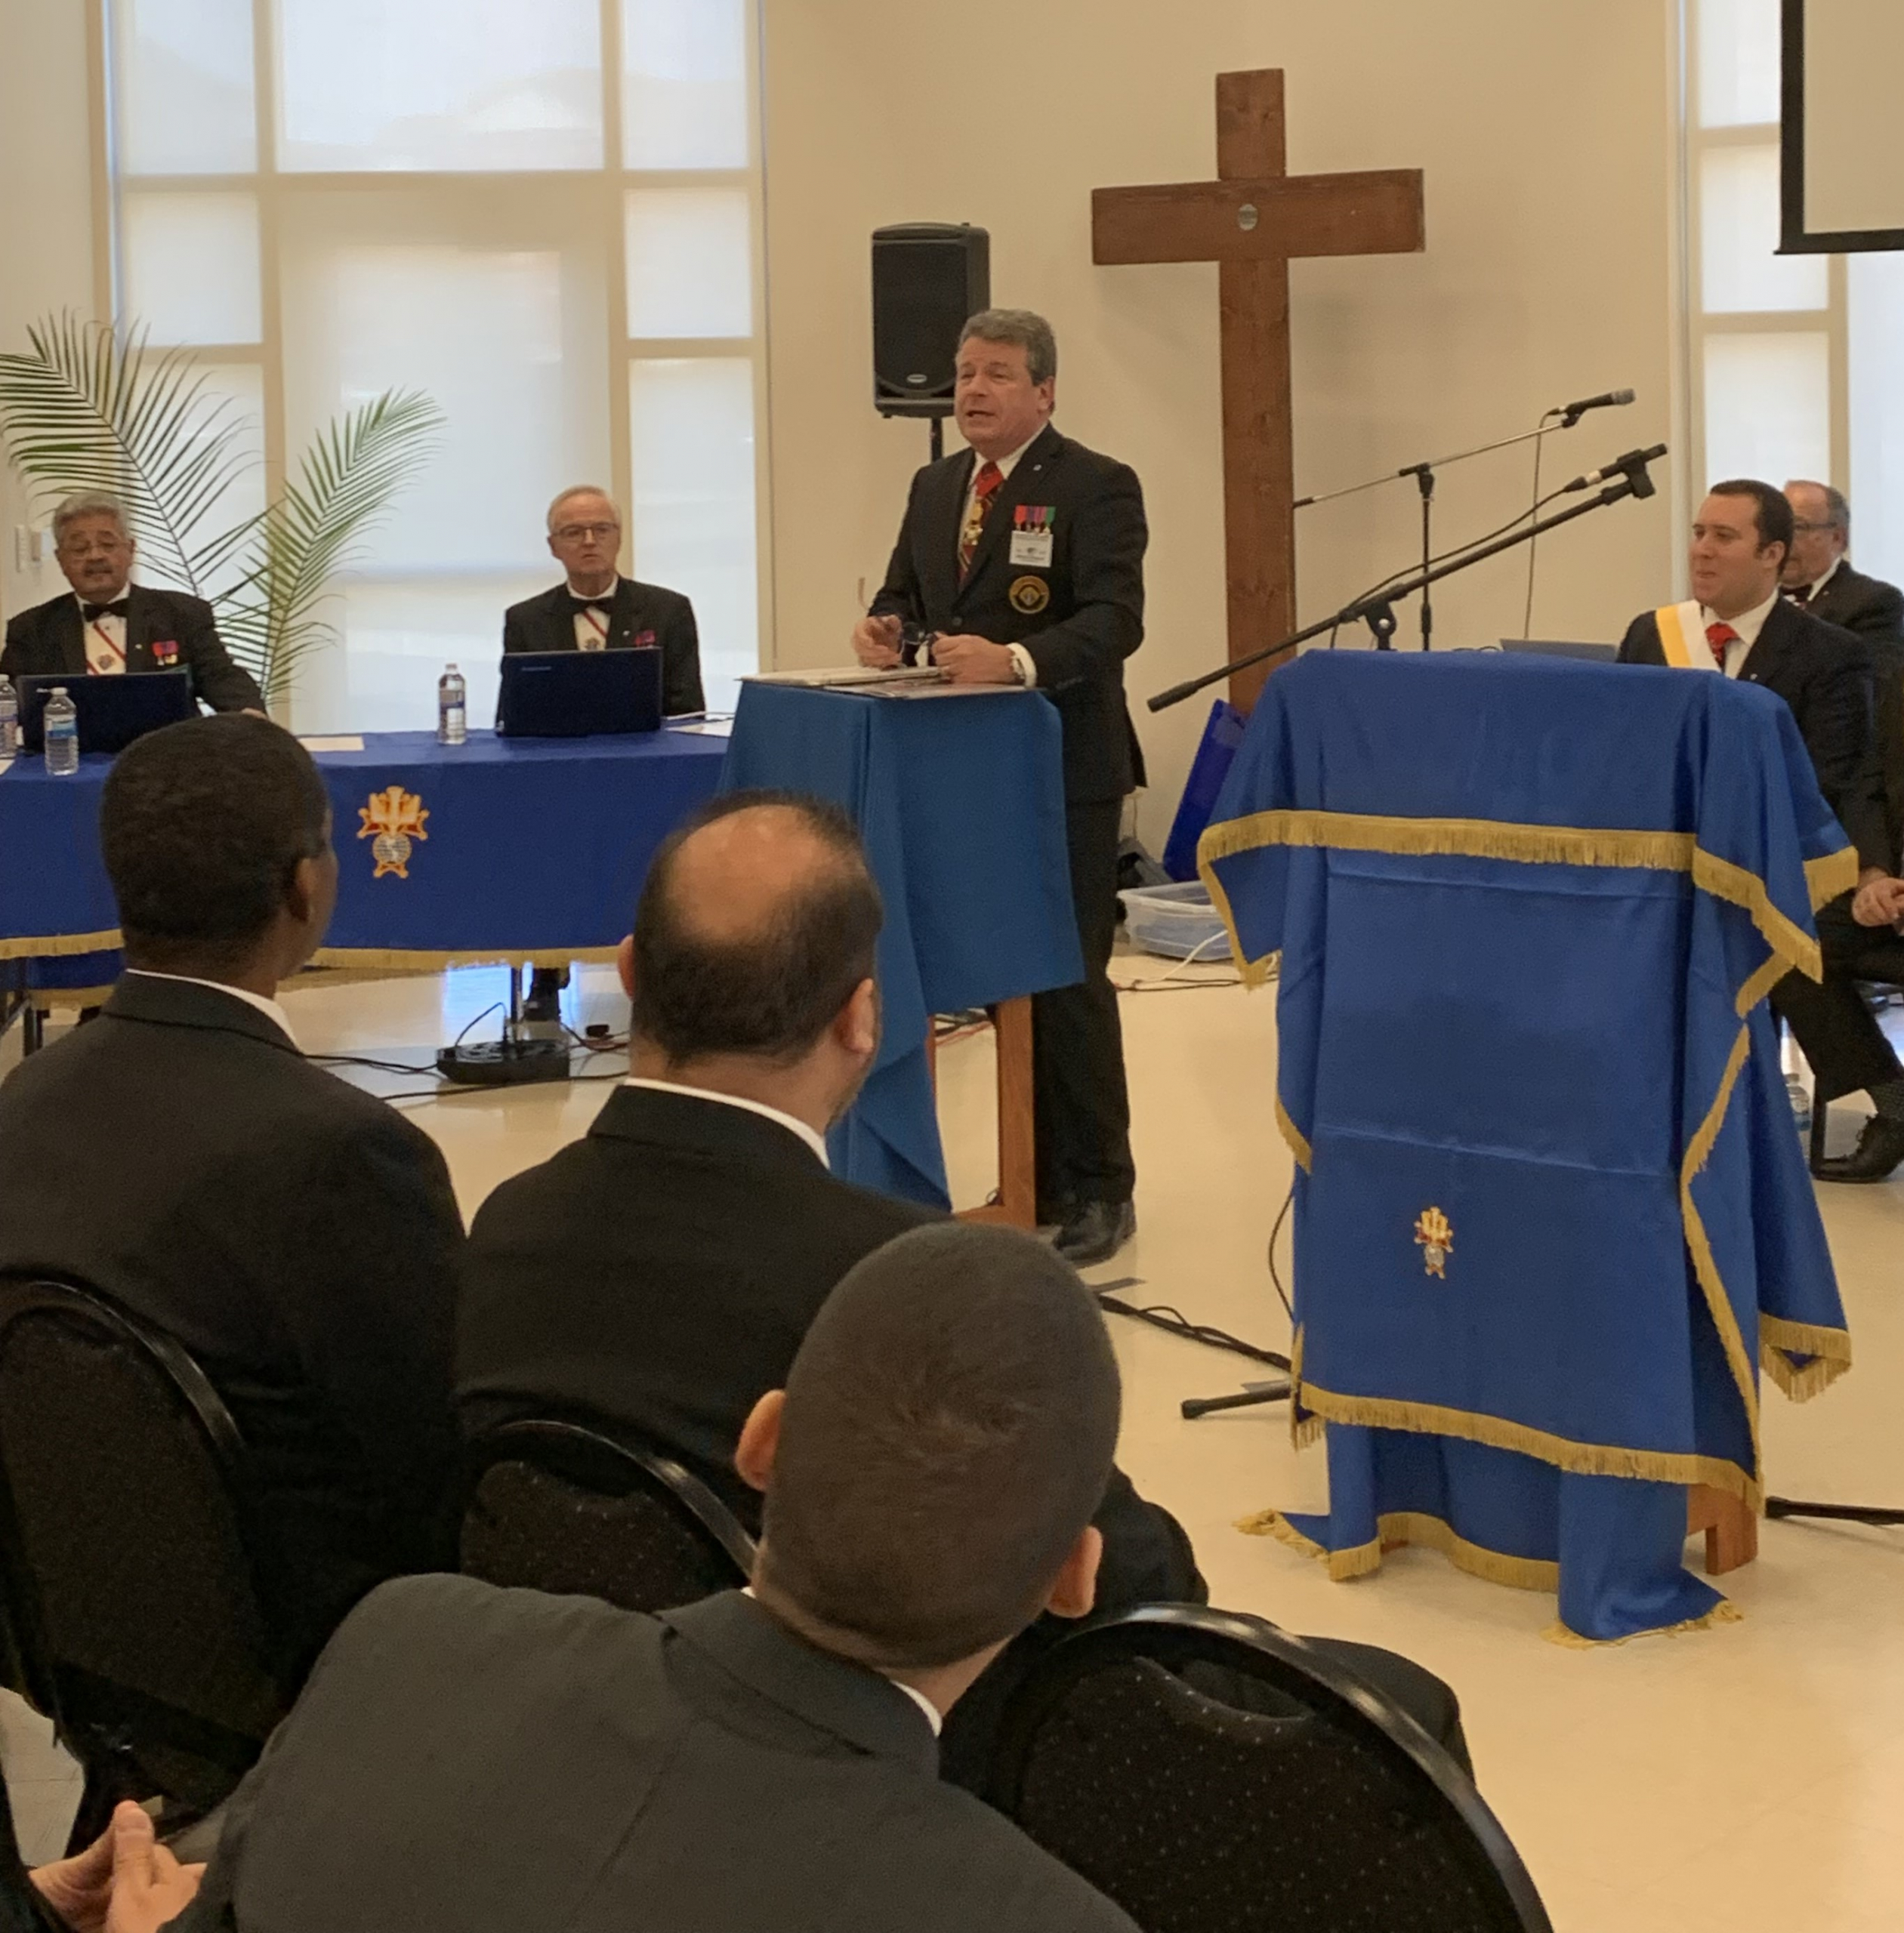 State Deputy Bruce S. Poulin, addresses the Sir Knights and Ladies with encouraging words about the upcoming 125th anniversary celebrations currently being planned for 2025 during the Fourth Degree Exemplification celebration on November 18, 2023